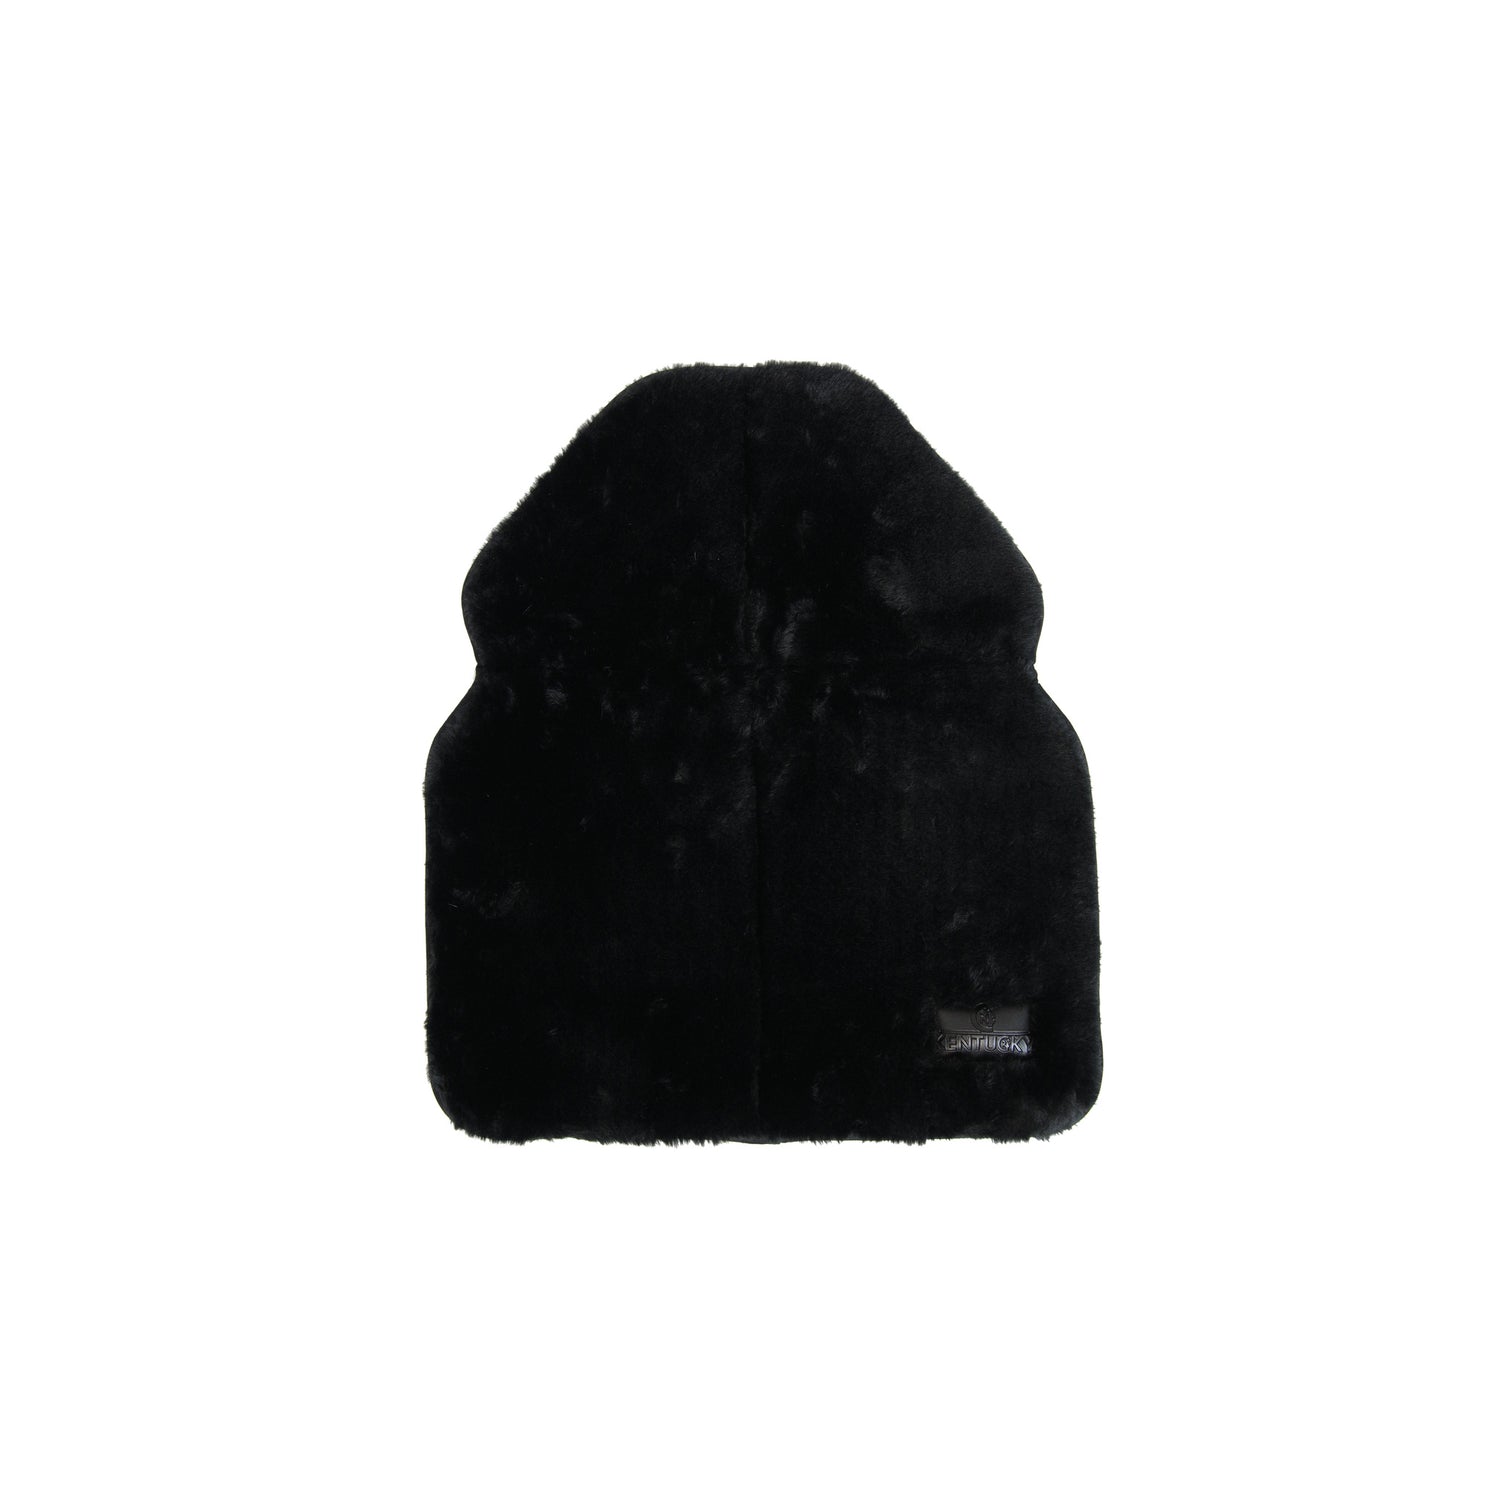 The Horse Bib Sheepskin Wither Protection is great at protecting your horse from rubs caused by the horse rugs. Cleverly made in one piece. It folds in half on the top of the horse rug and as a result protects your horse. The sheepskin side is placed against the horse’s wither, which offers maximum comfort.